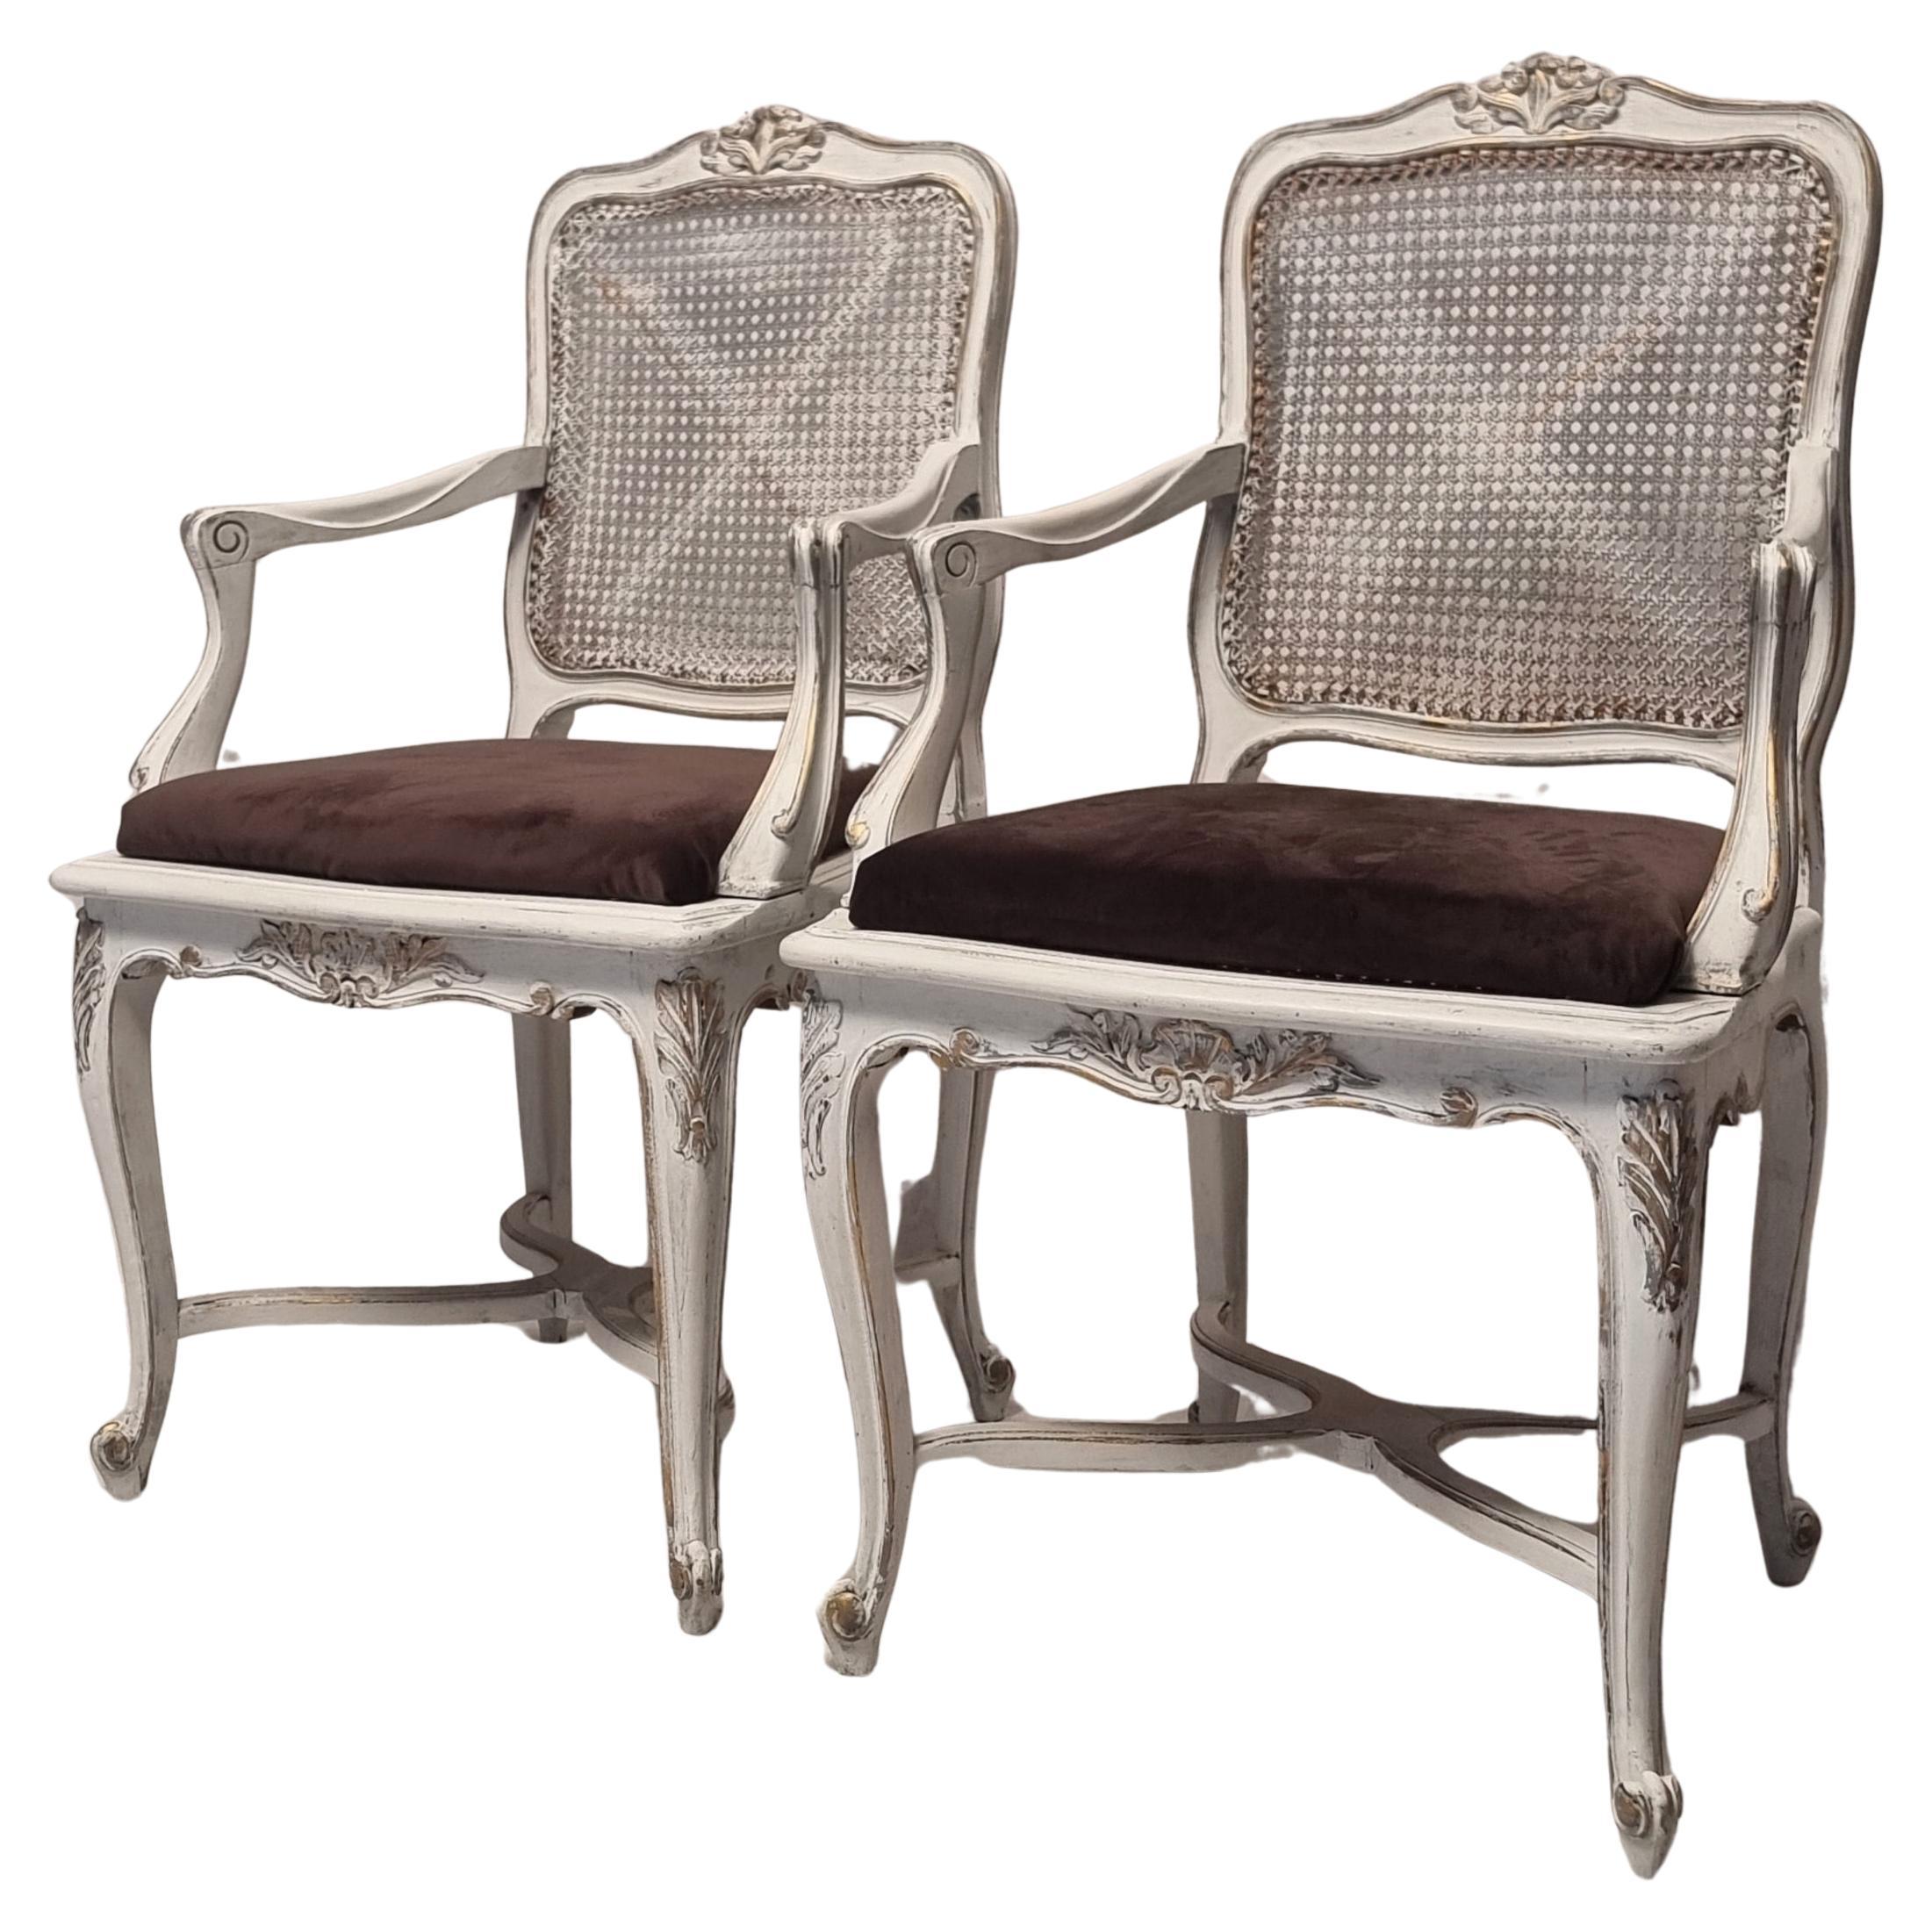 Pair Of Regency Style Cane Armchairs - Painted Wood - 19th For Sale